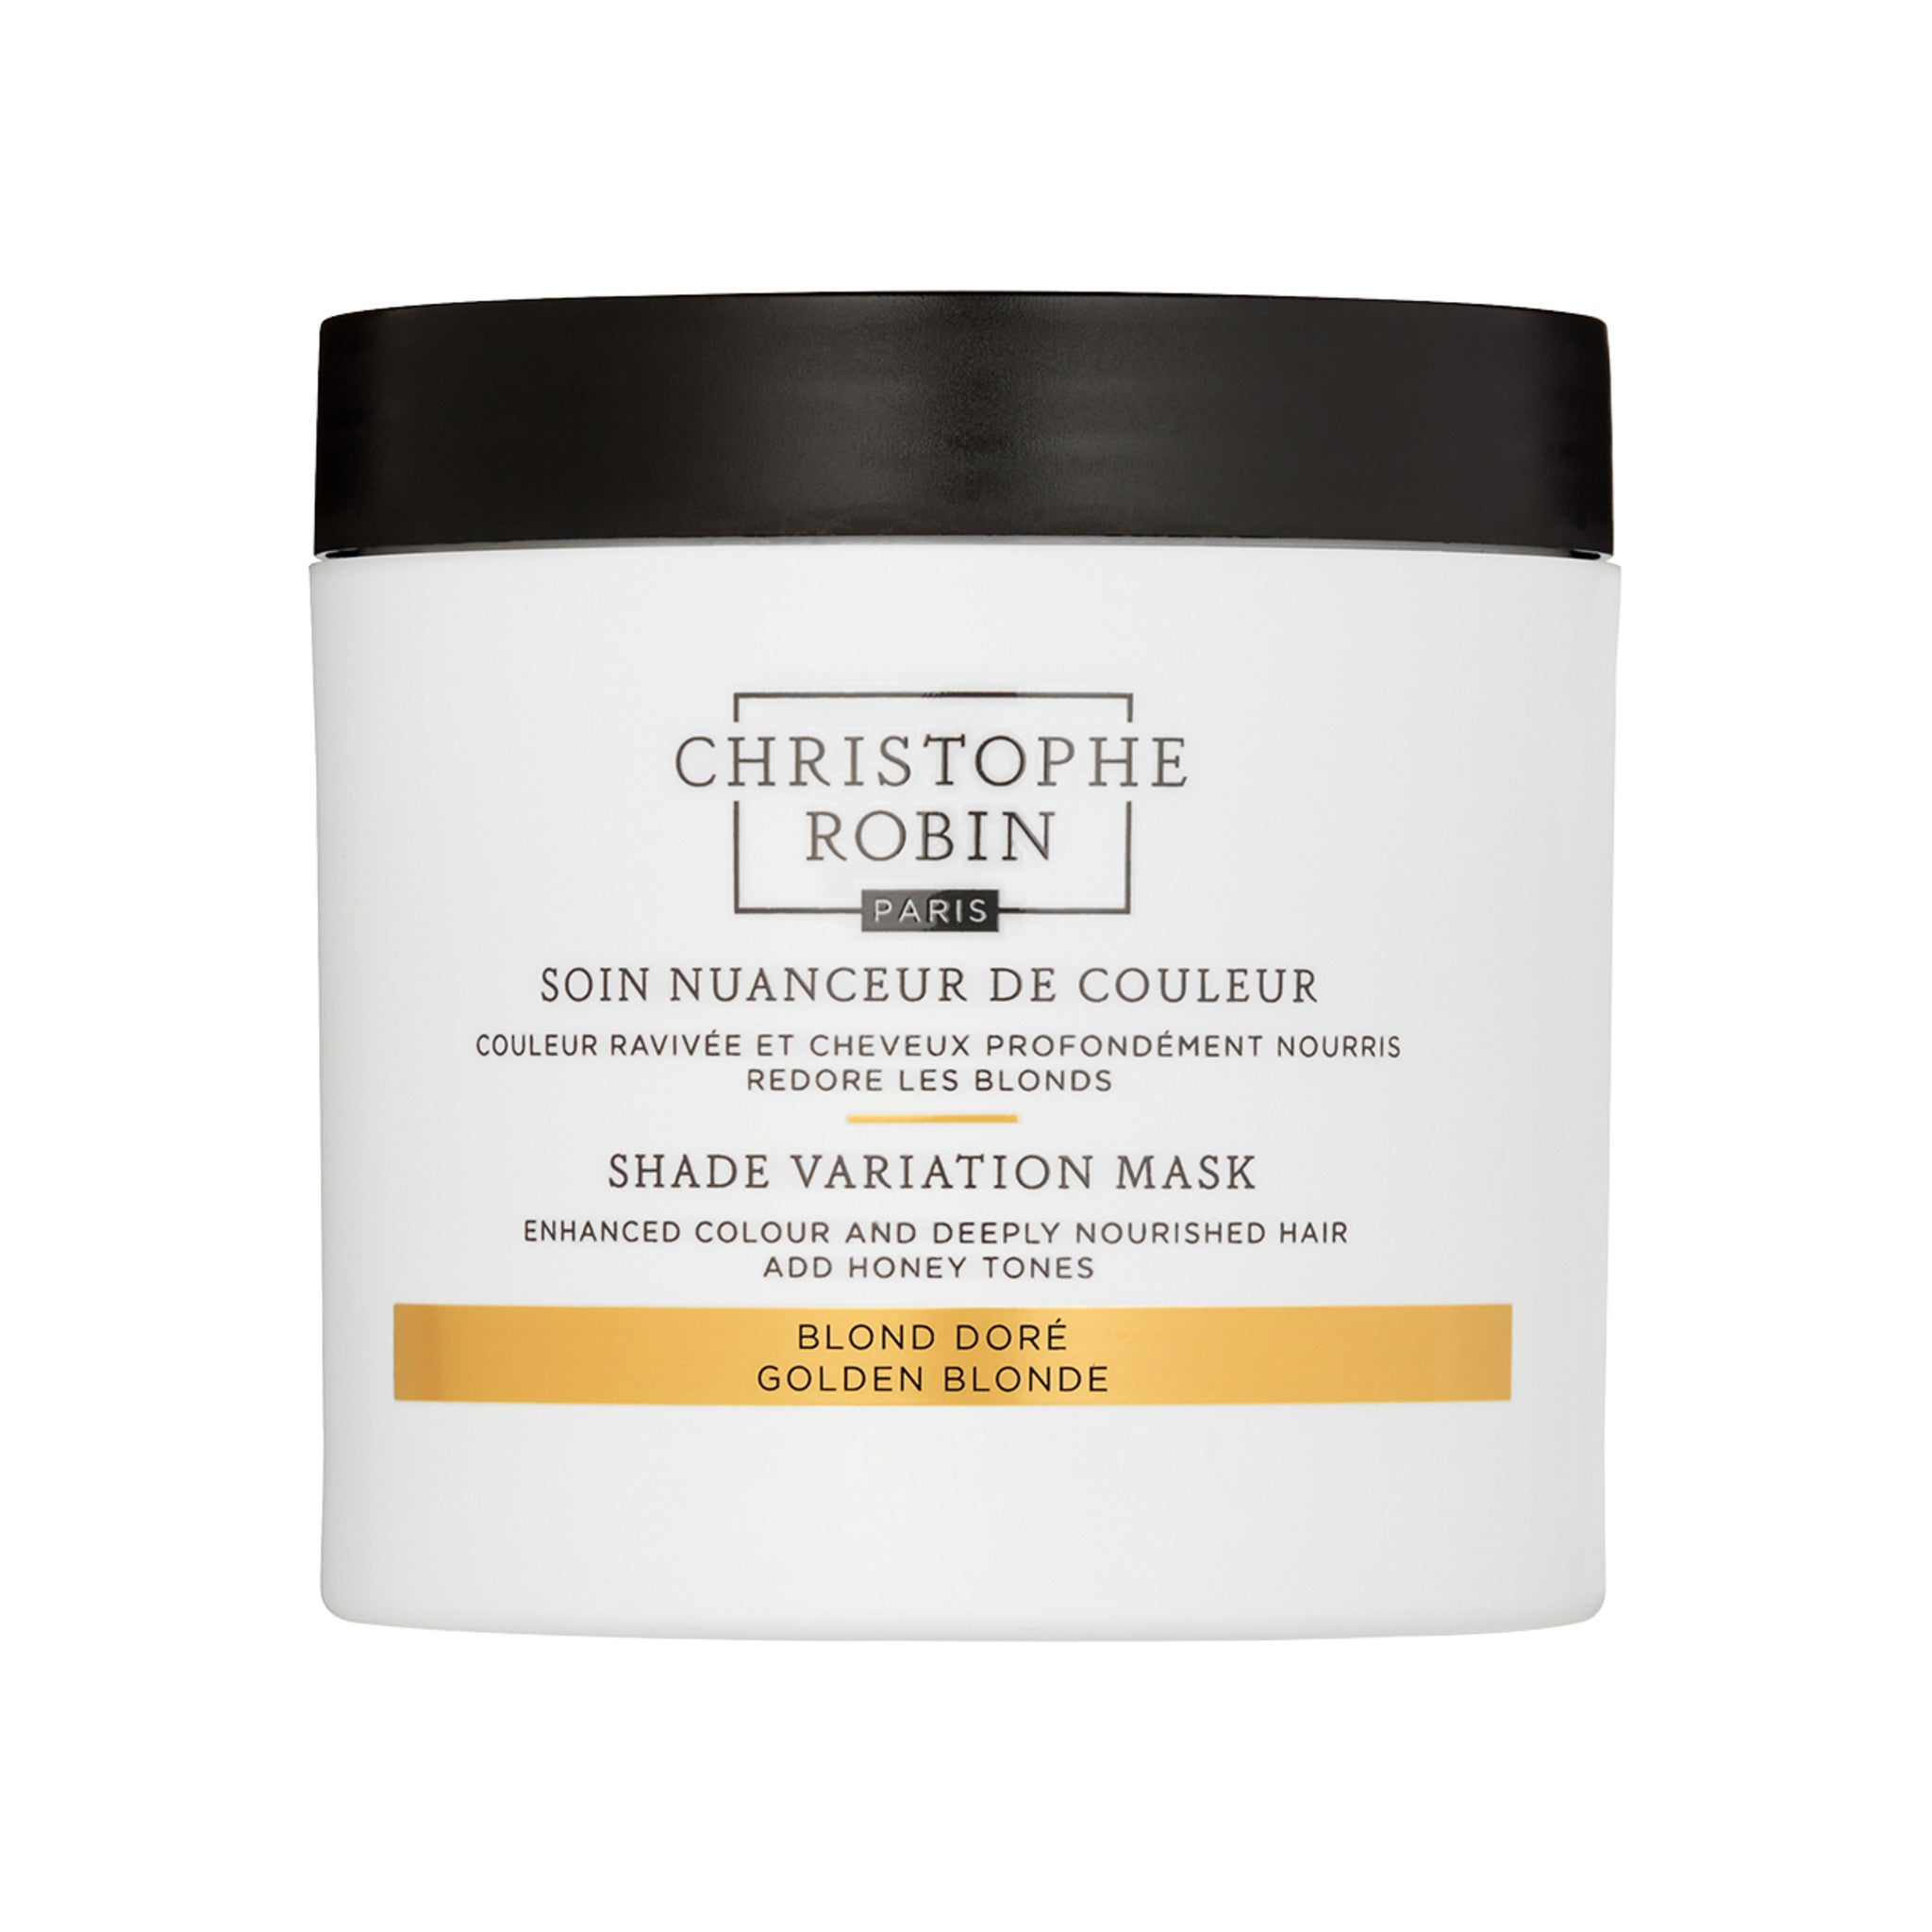 Christophe Robin Shade Variation Mask Golden Blonde main image. This product is for blonde hair